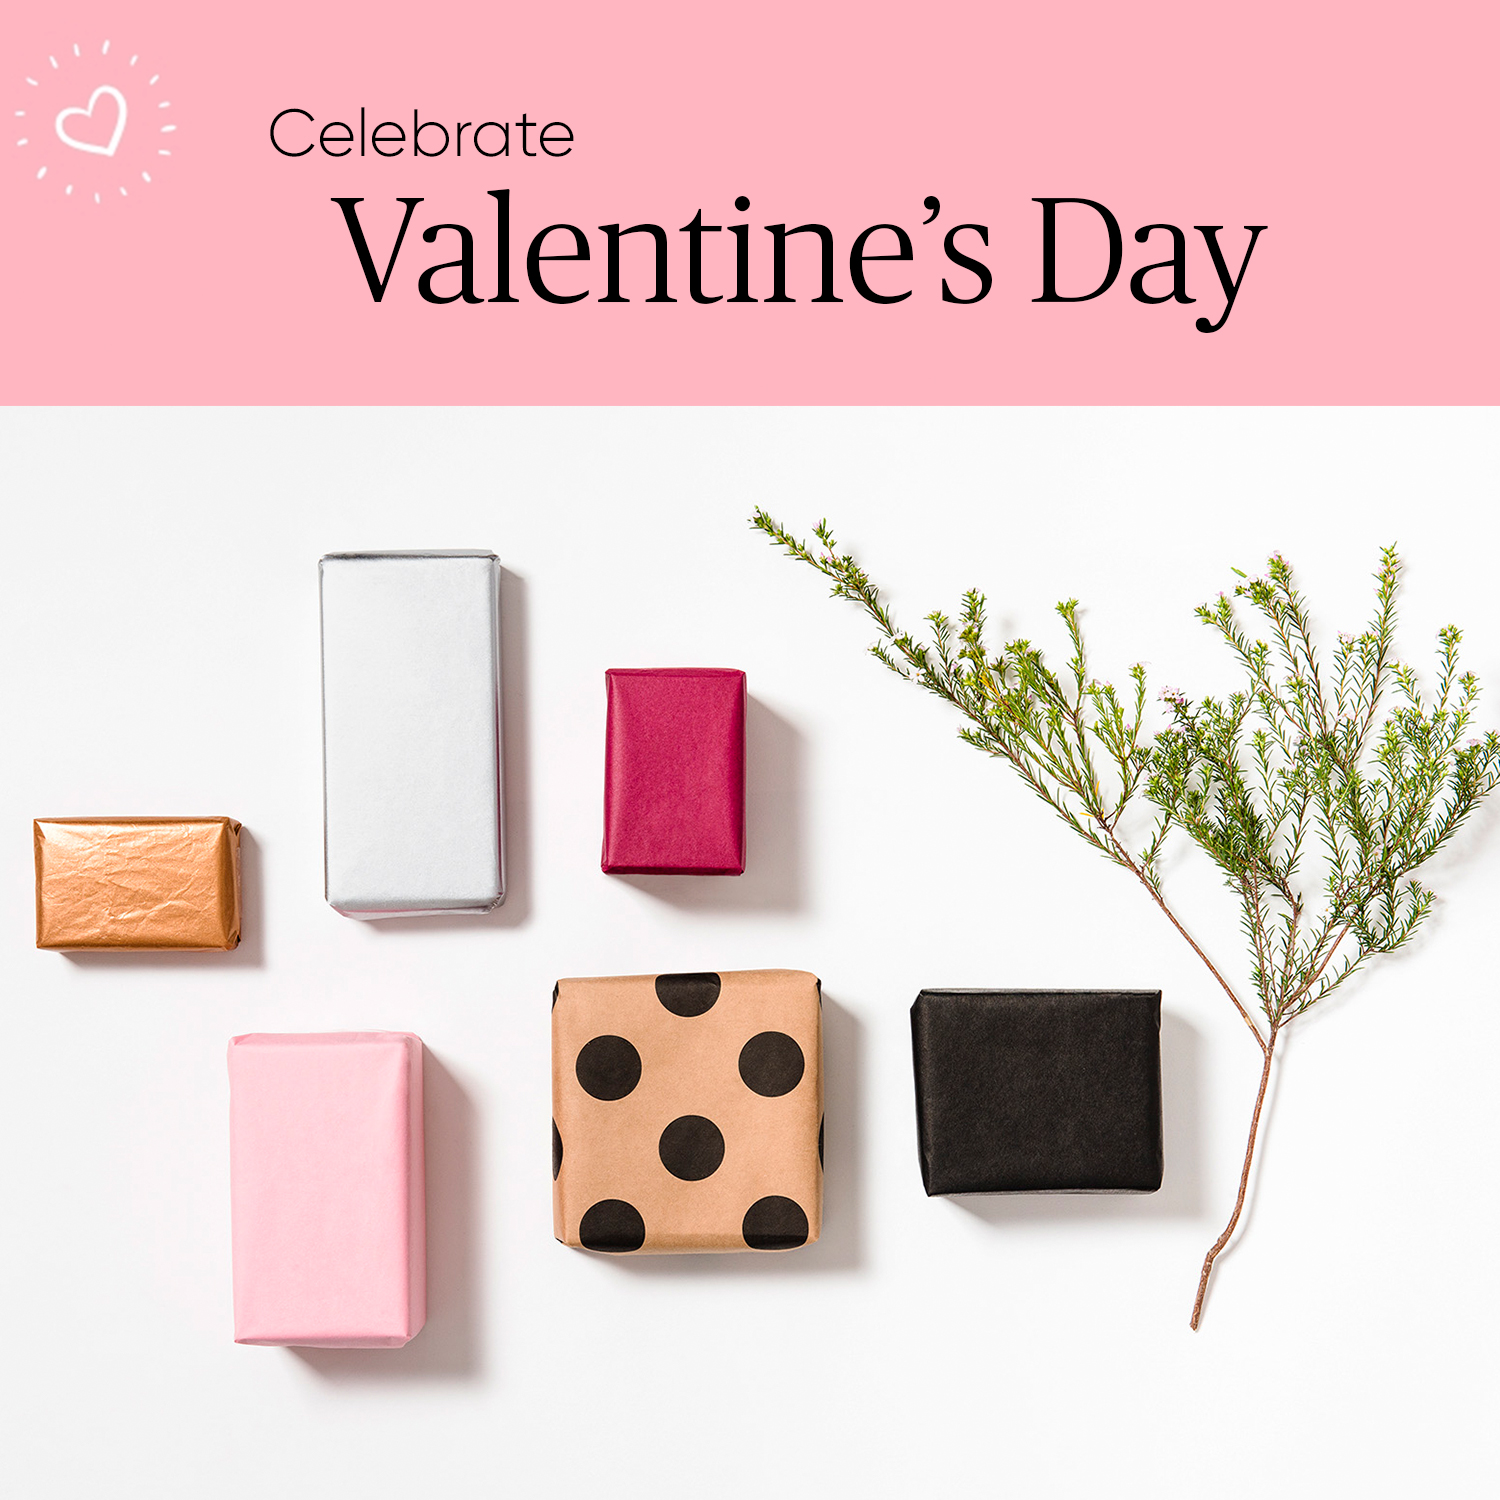 Valentine's Day with PaperPak